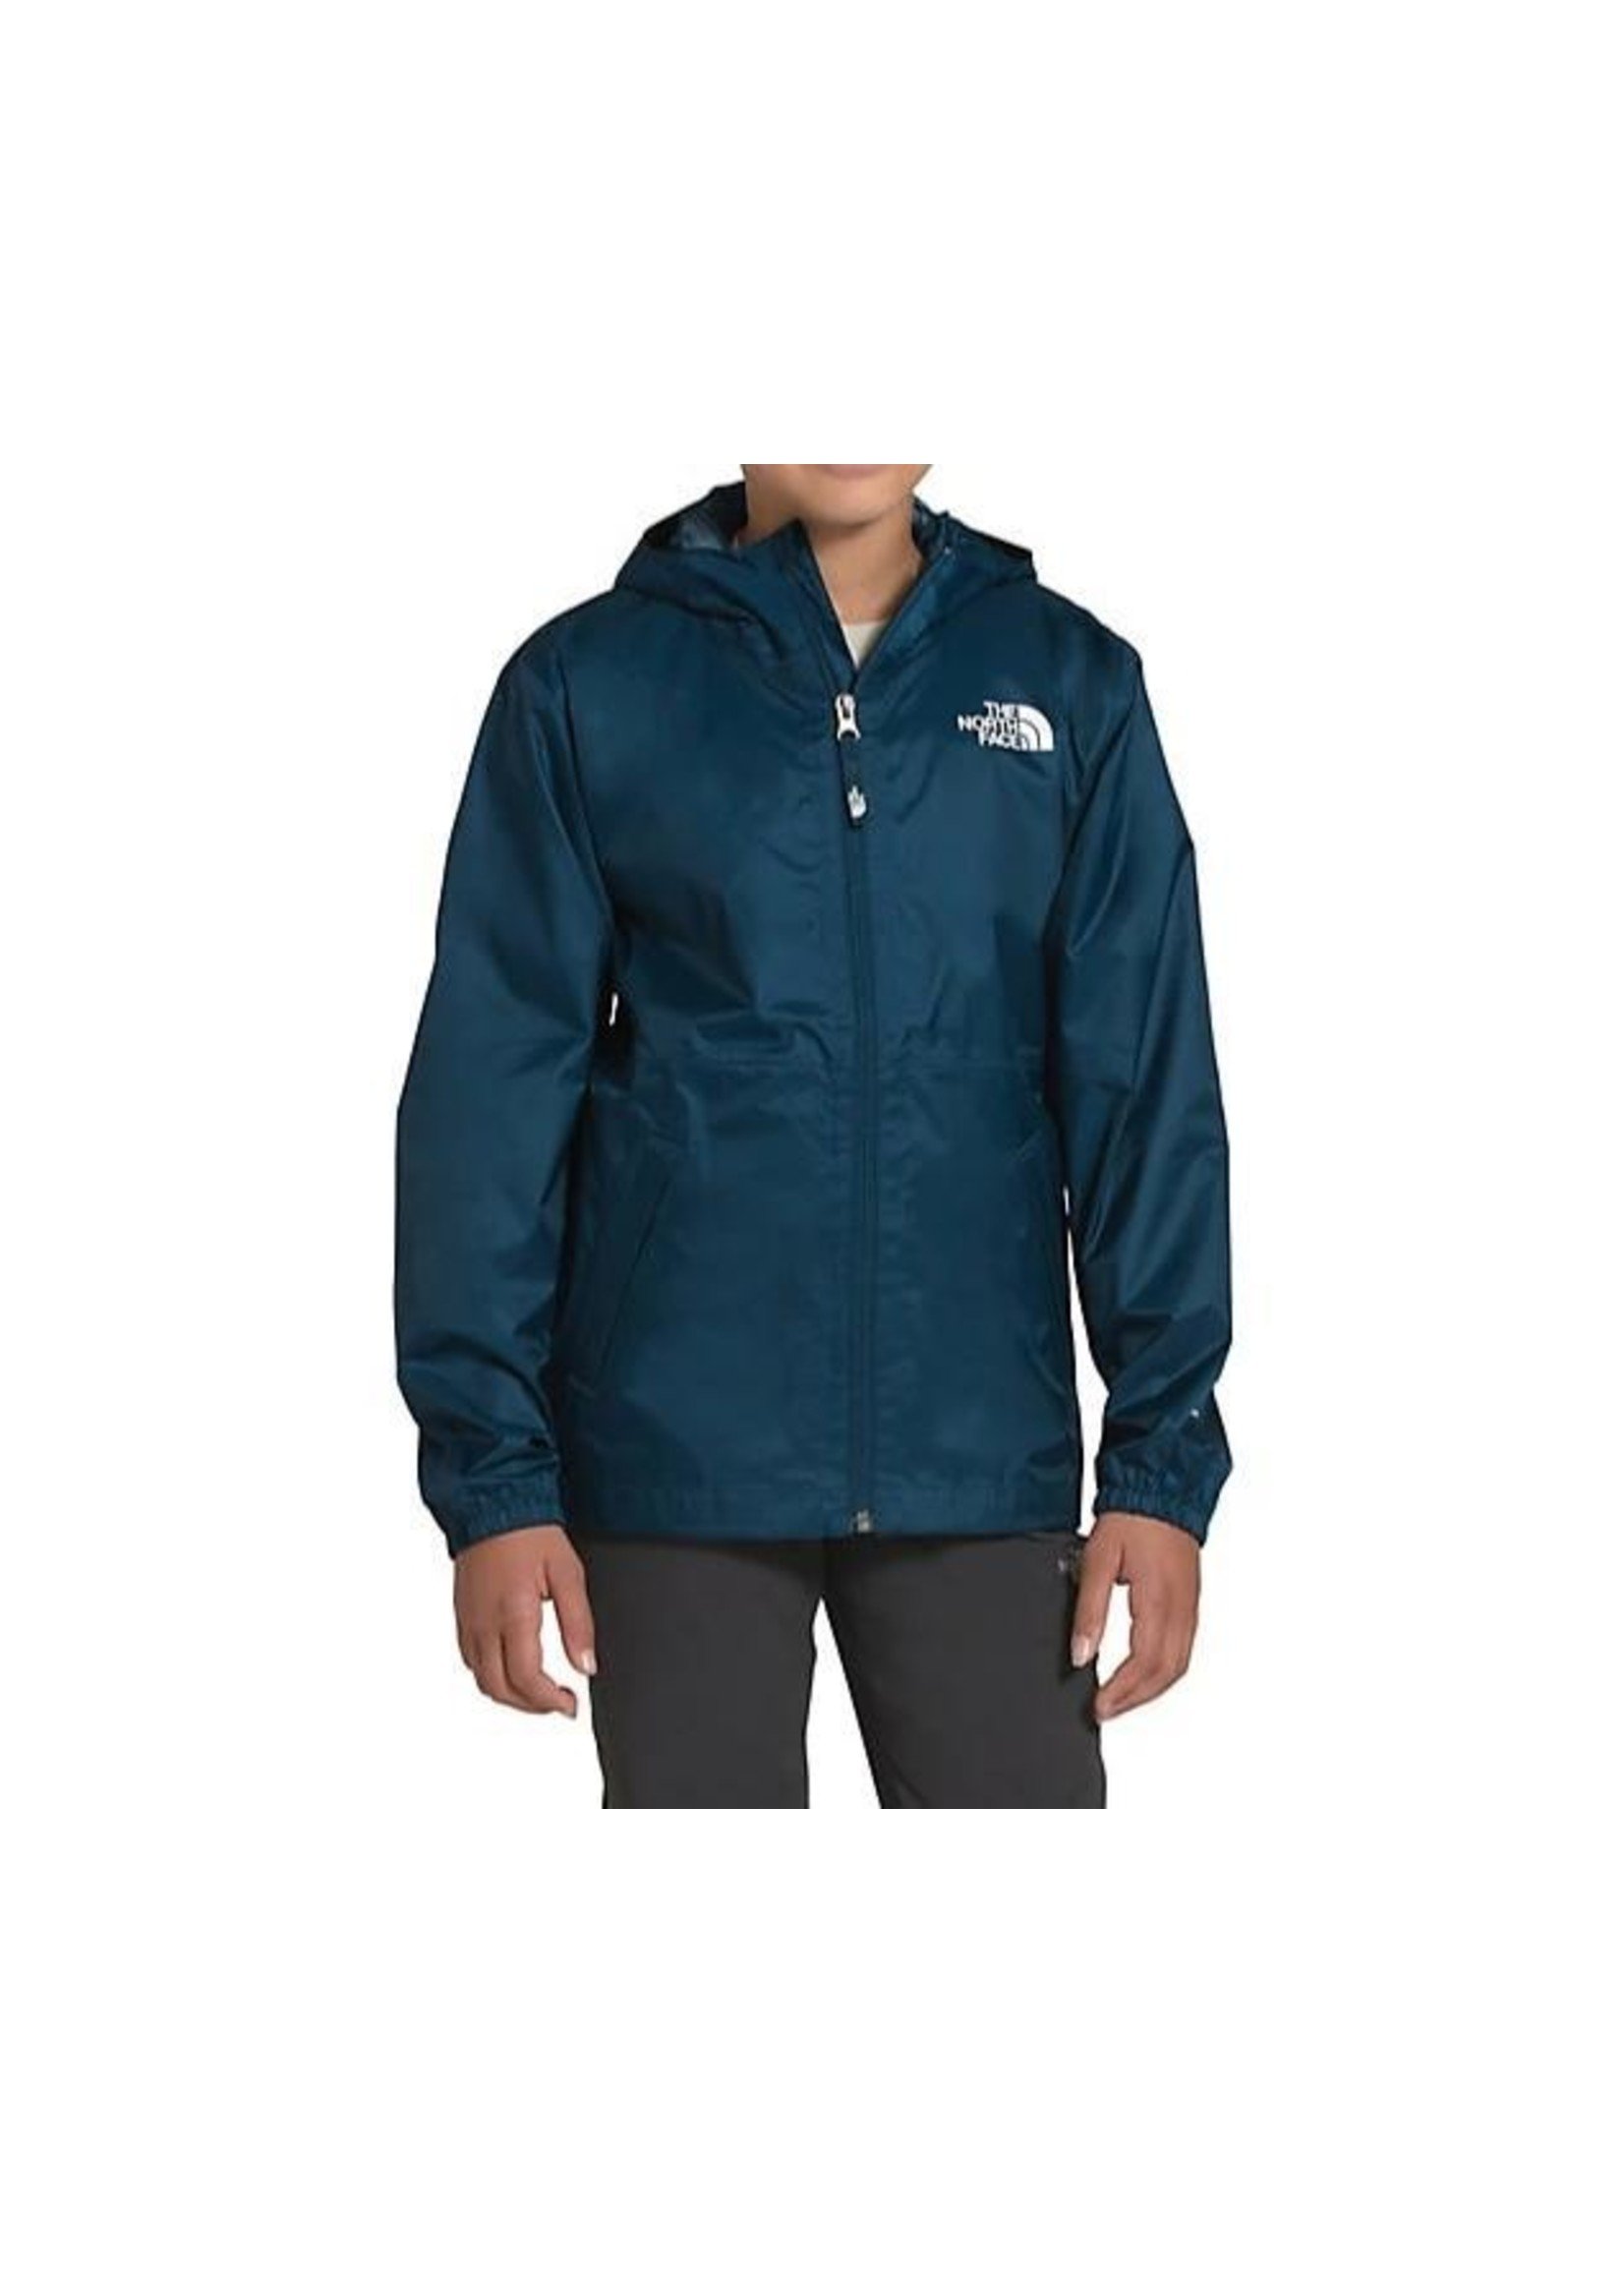 The North Face Youth Zipline Jacket Blue Wing Teal